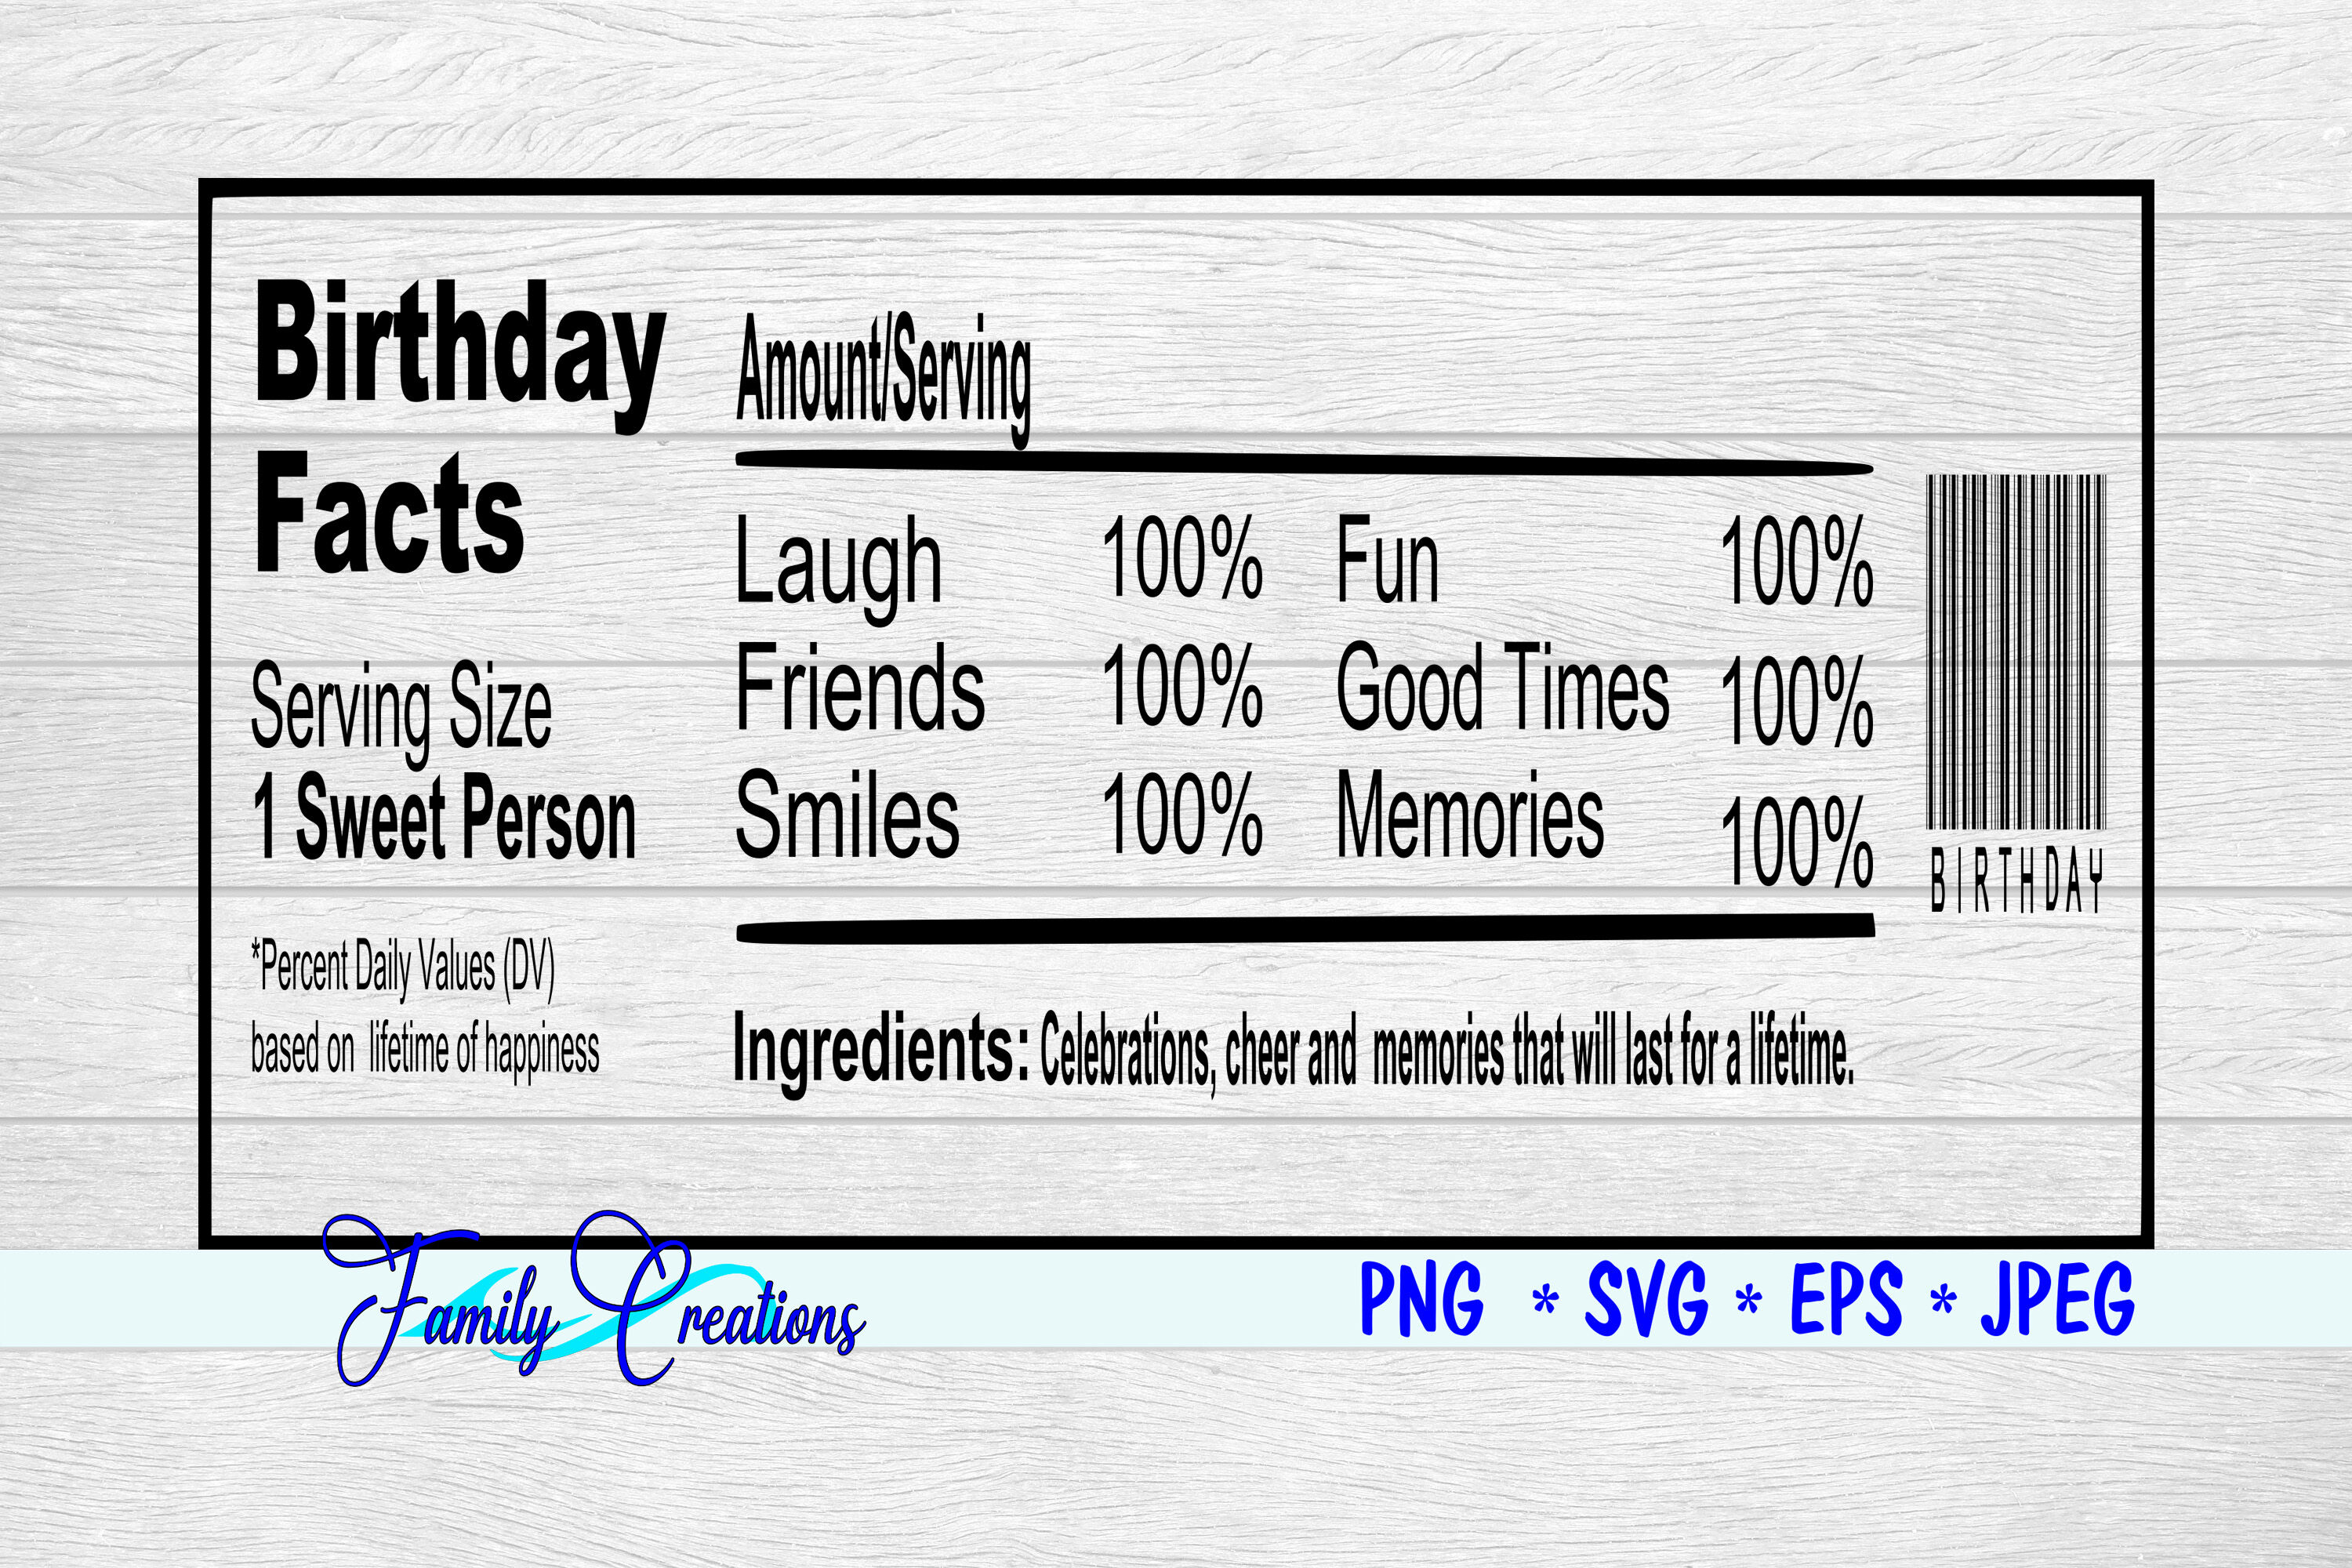 Birthday Facts Nutrition Label By Family Creations